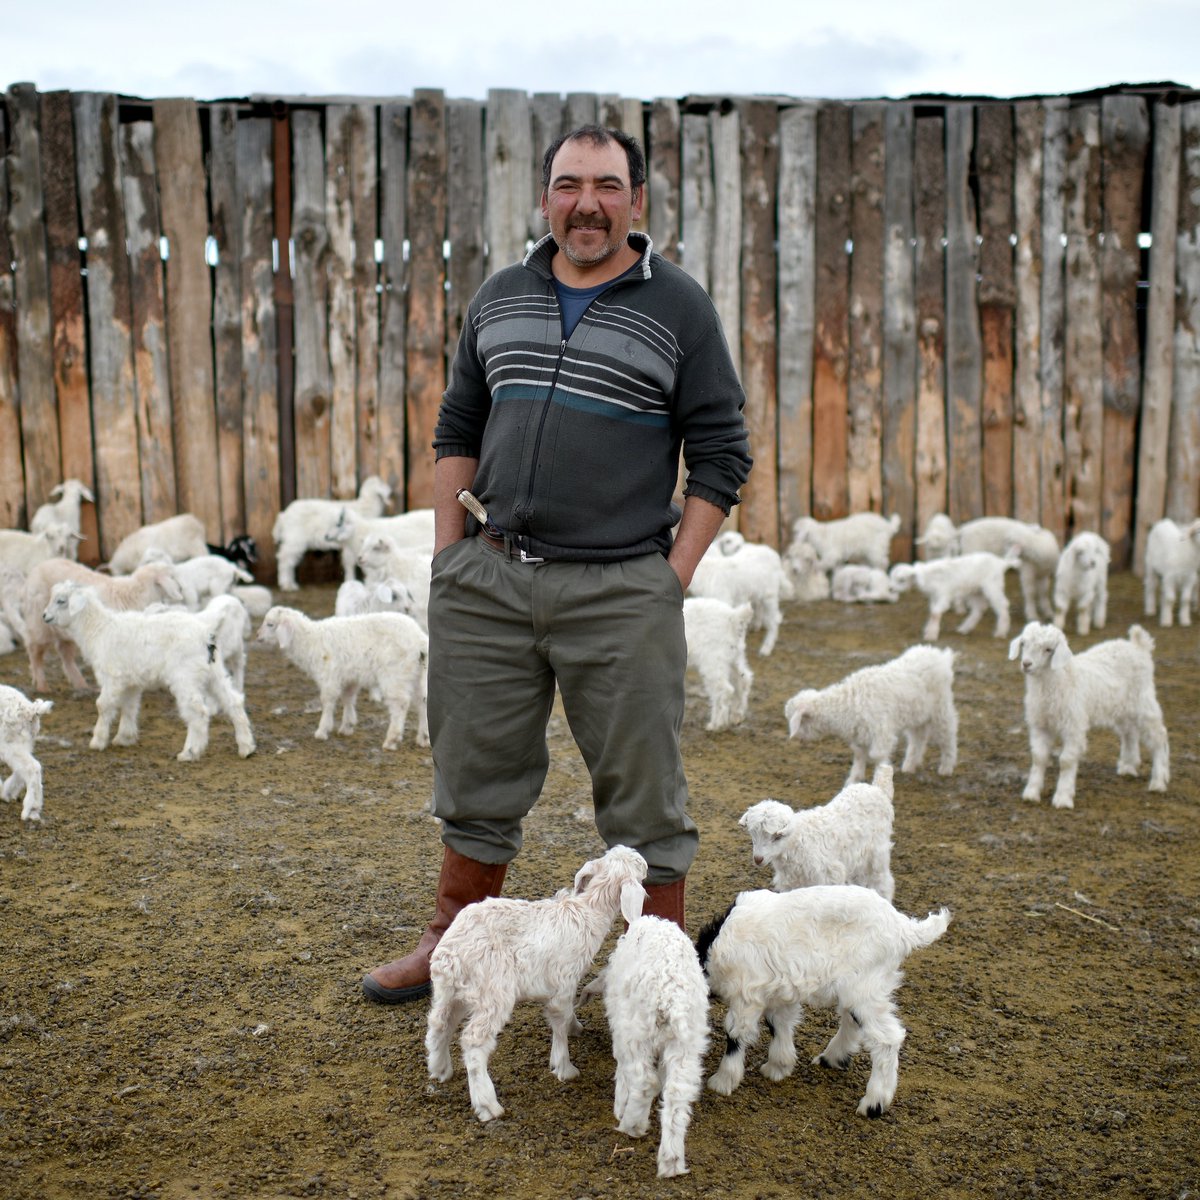 🐐250 goats 🐄18 cows +🐔a few chickens live on Gustavo’s farm. Here in remote rural #Argentina, lack of telecommunications was once a major issue. But thanks to IFAD, a new antenna has turned things around, connecting Gustavo to other producers and to his family.